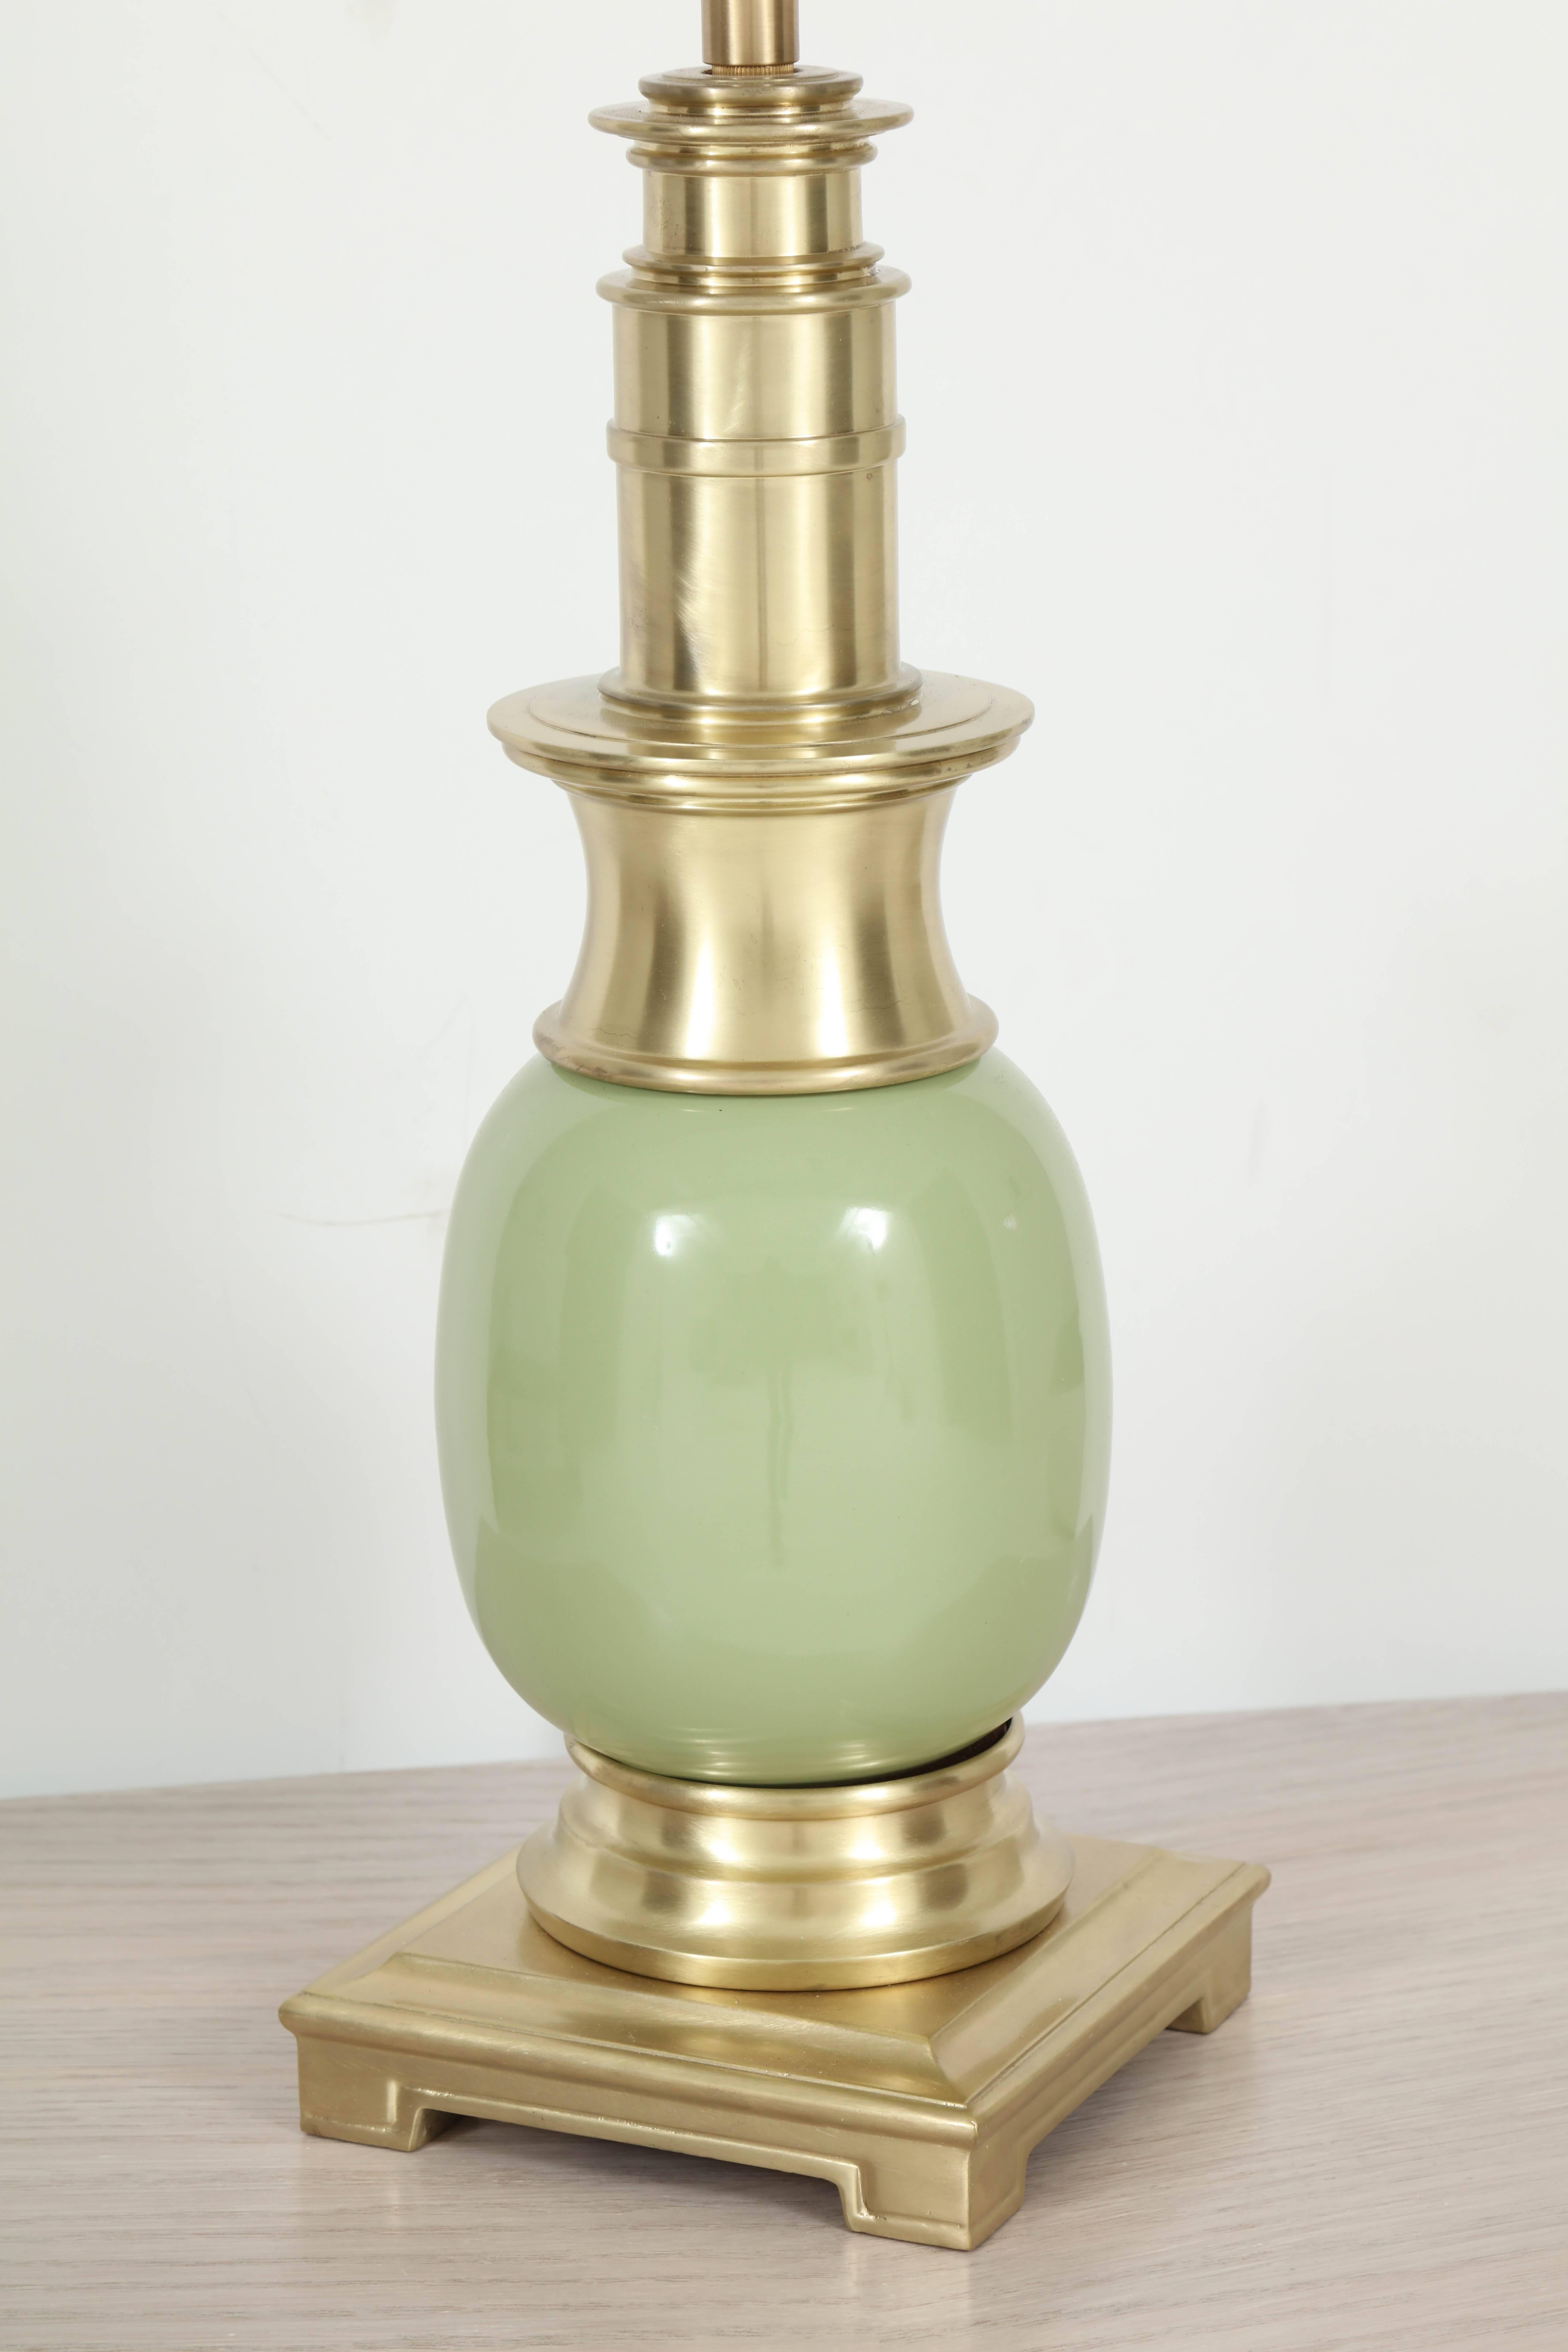 20th Century Pair of Celadon Green Ceramic and Brass Lamps by Stiffel